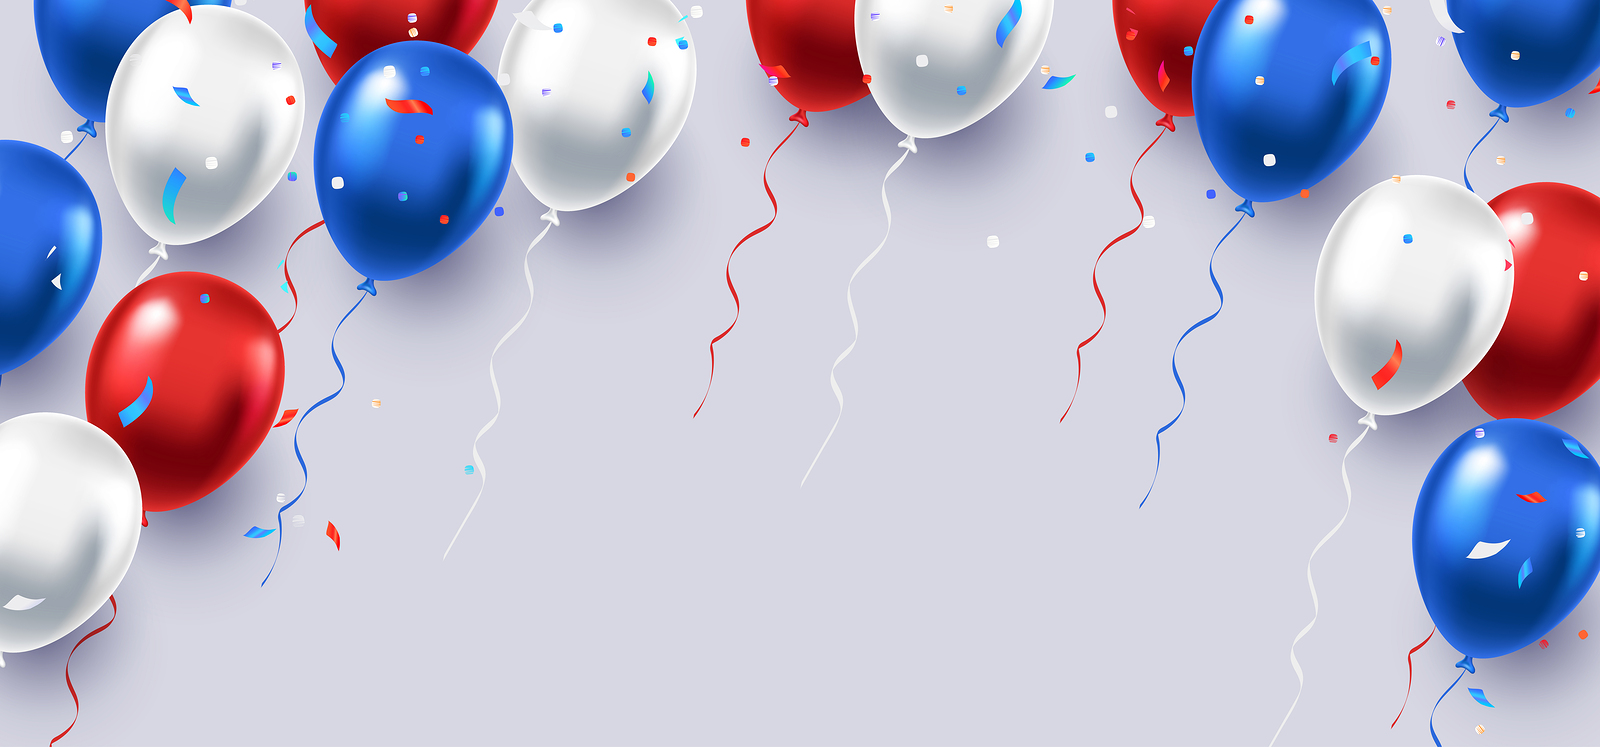 Formal greeting design in national blue, red and white colors with realistic flying balloons. Celebration, festival background. Greeting banner or poster with white, blue, and red helium balloons.